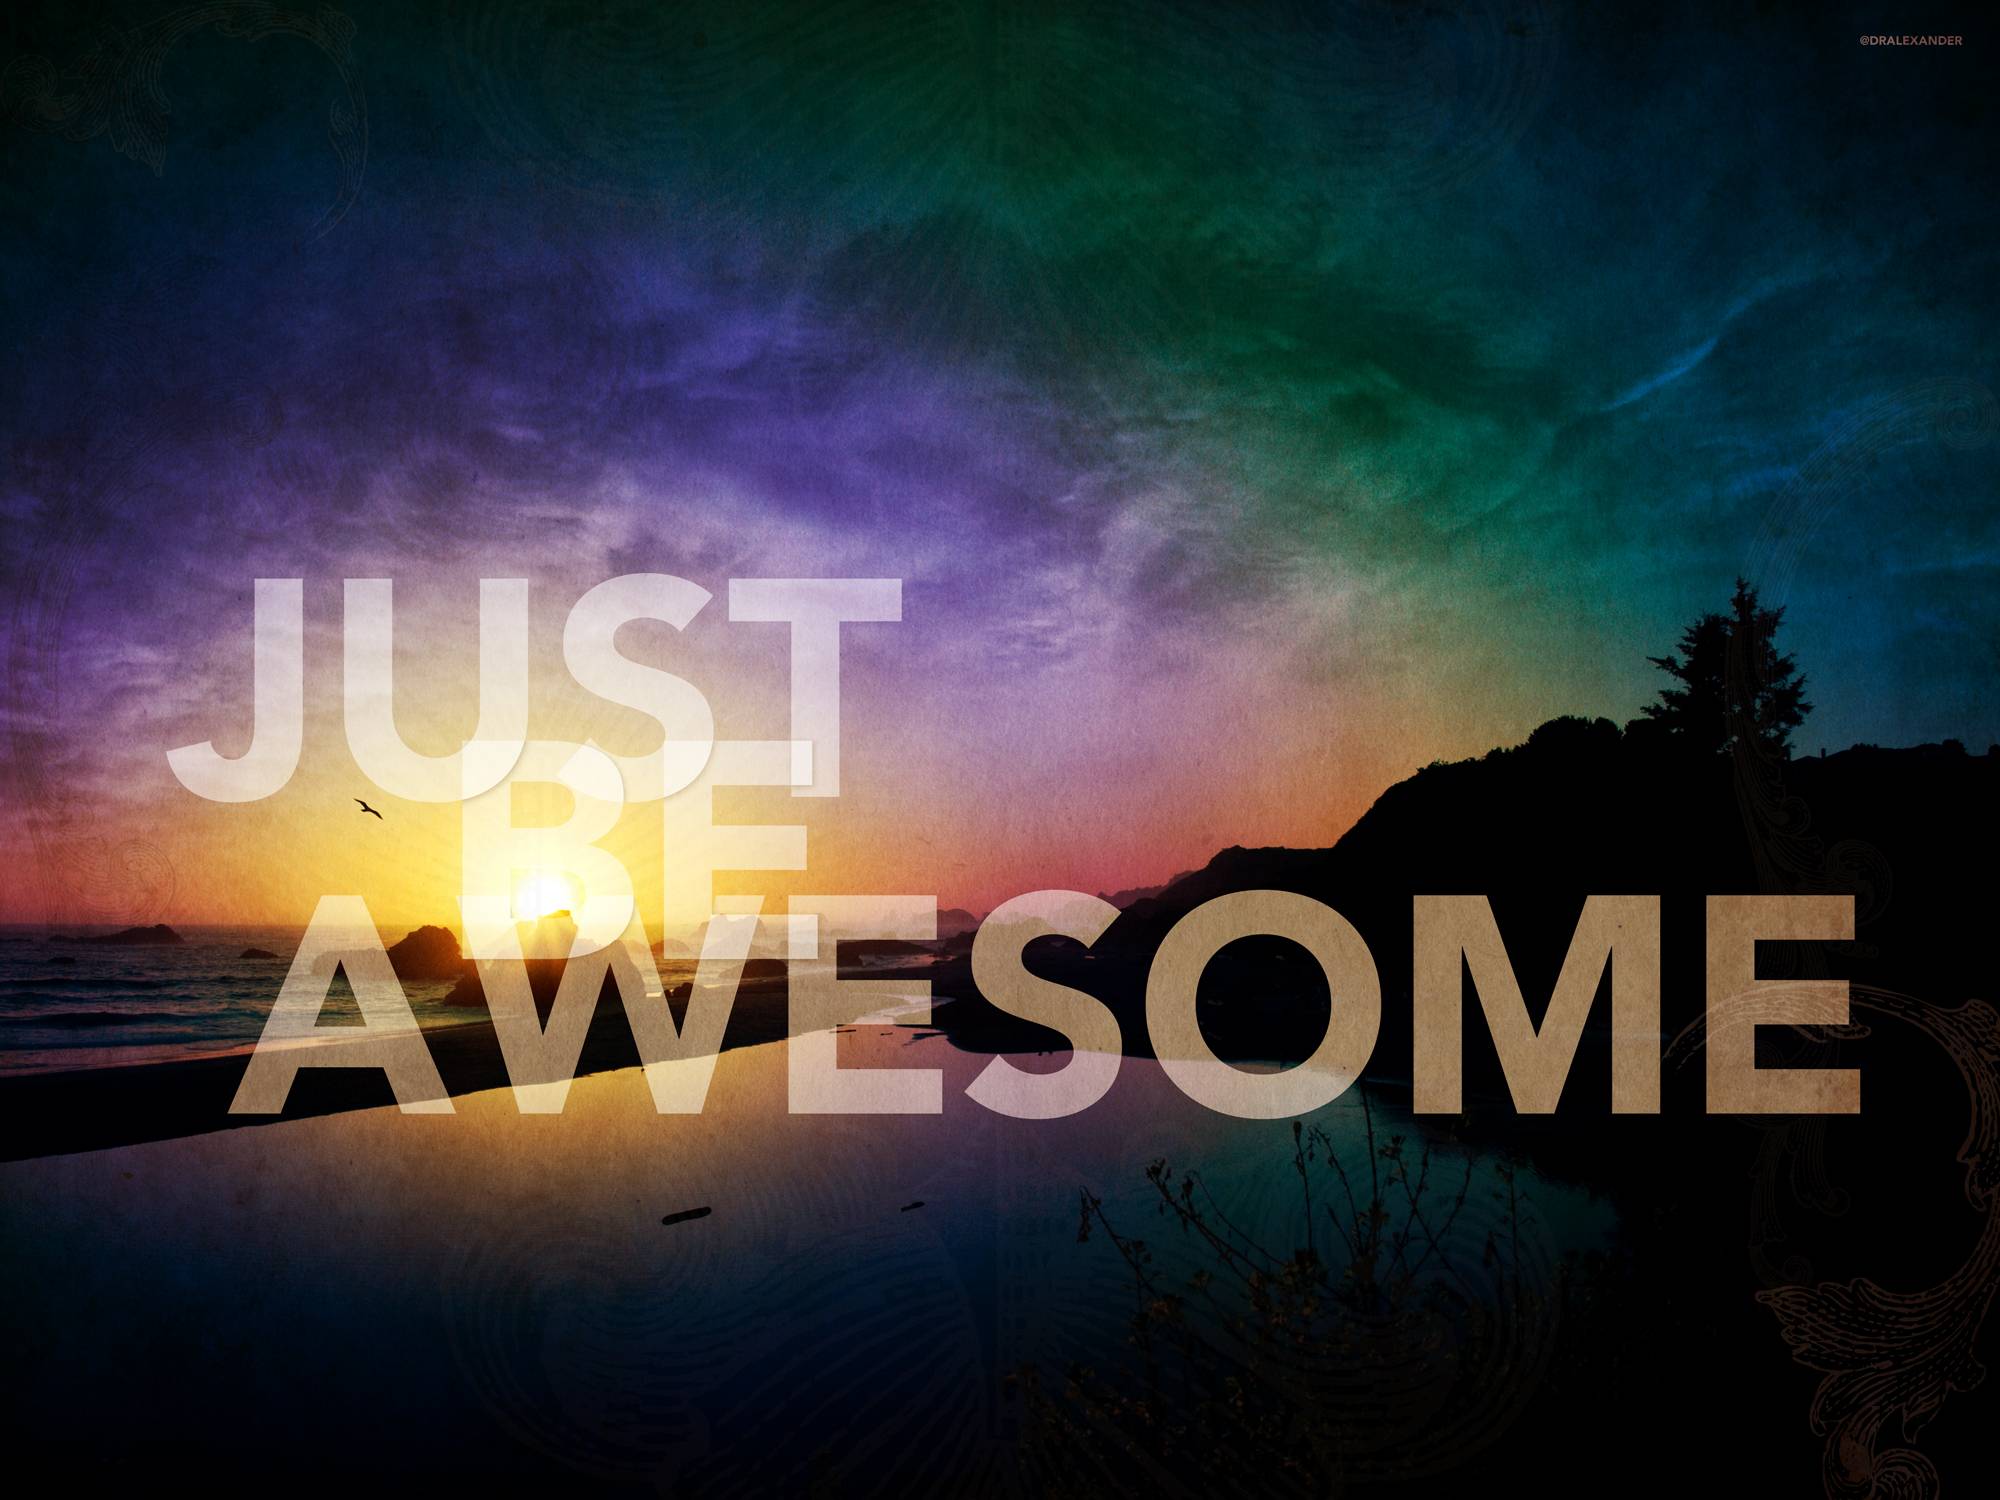 Being awesome